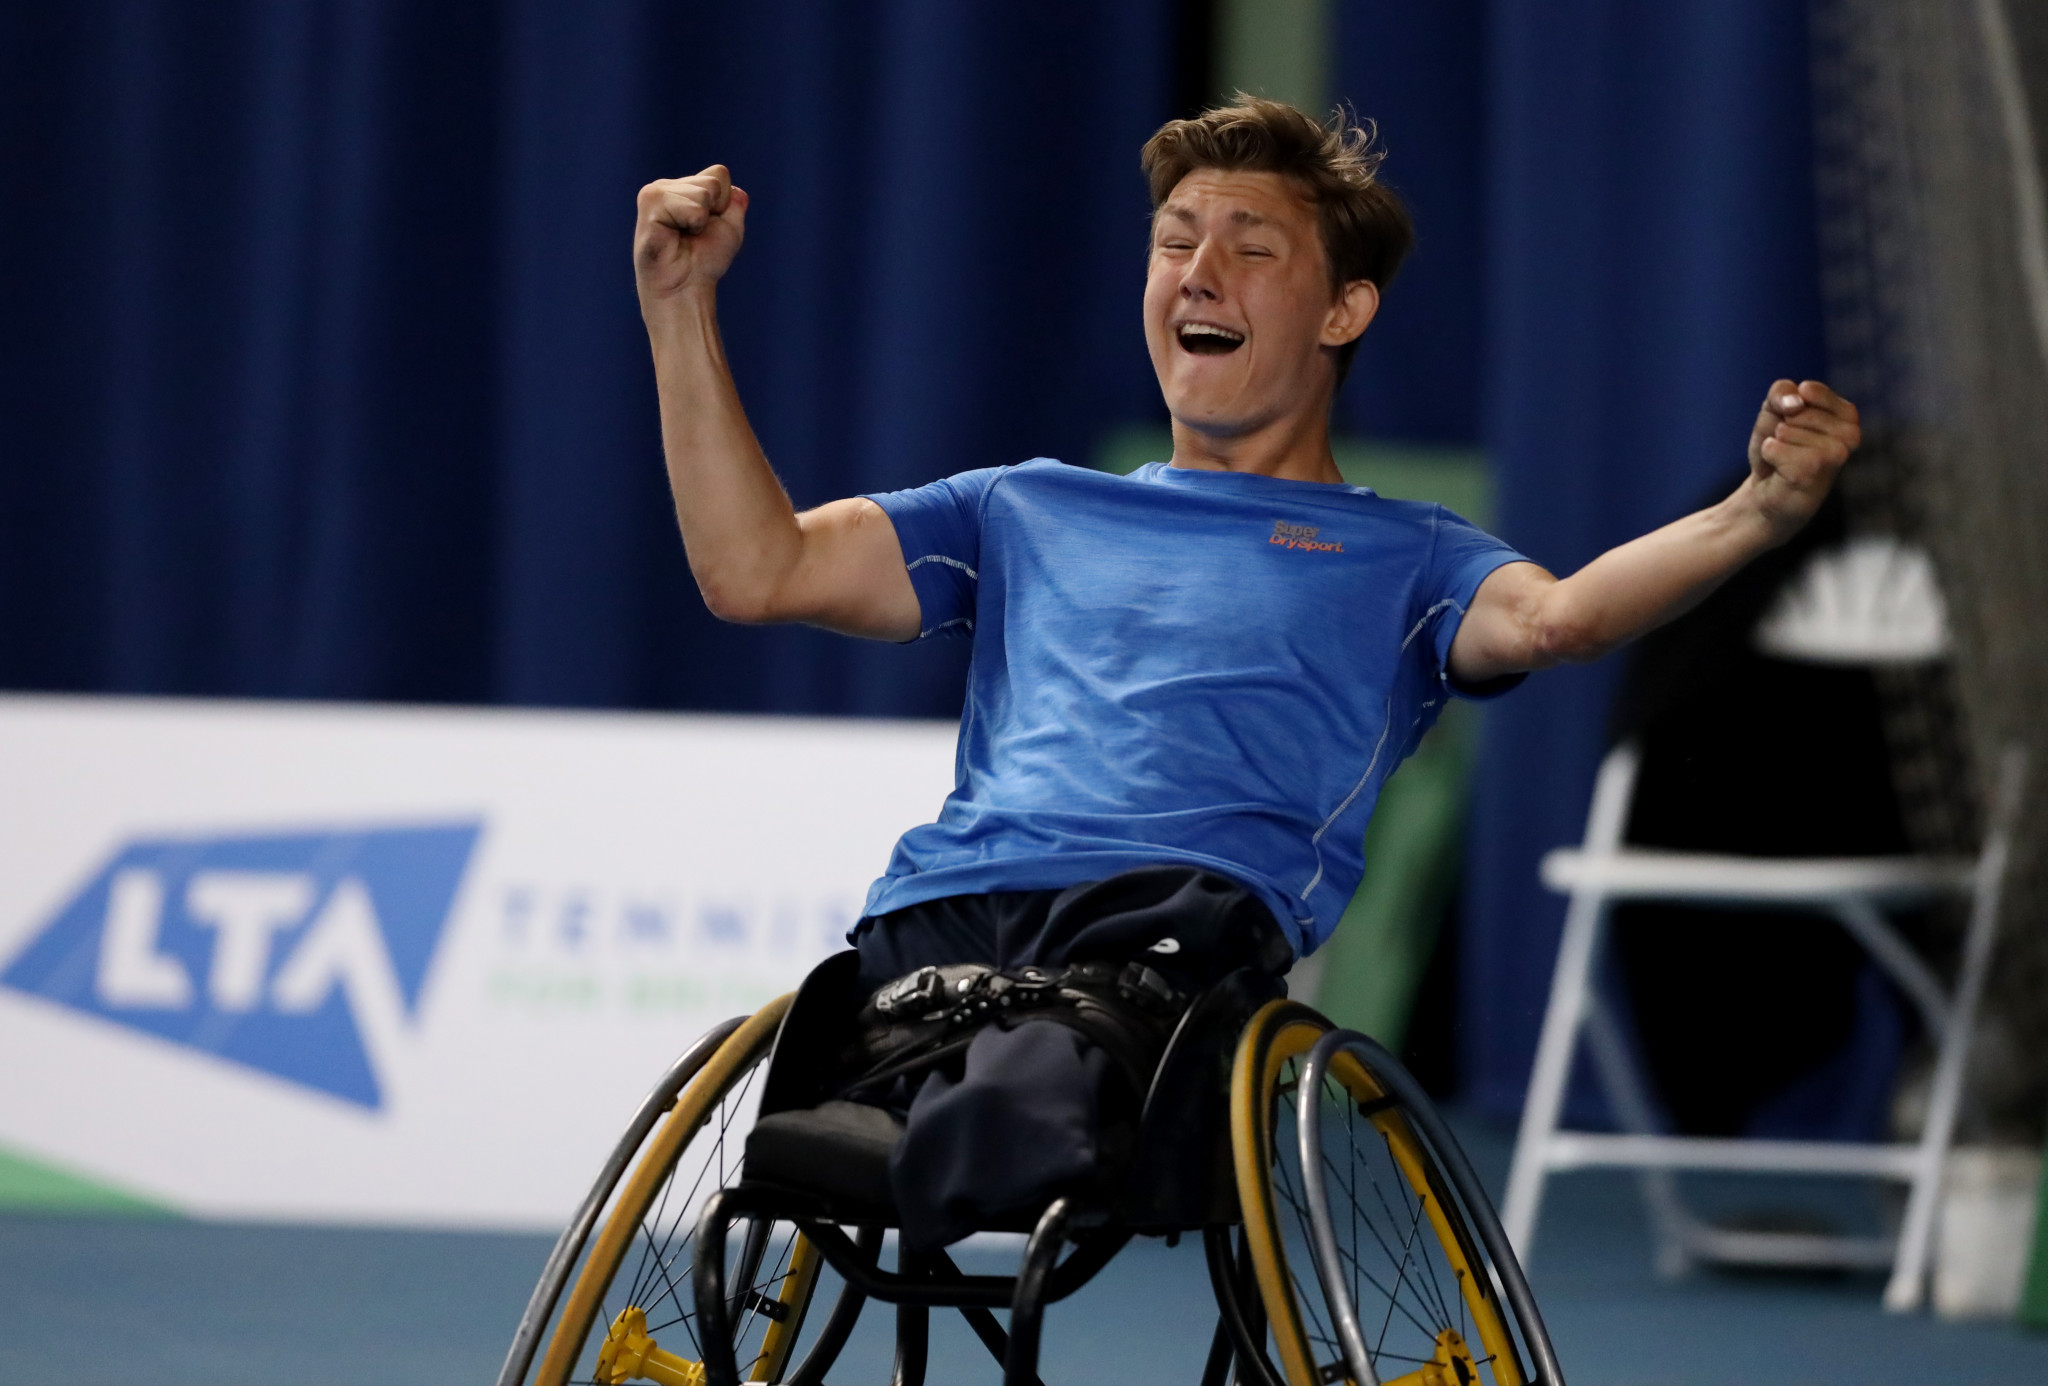 Sixteen-year-old Vink completes dual triumph at British Open Wheelchair Tennis Championships